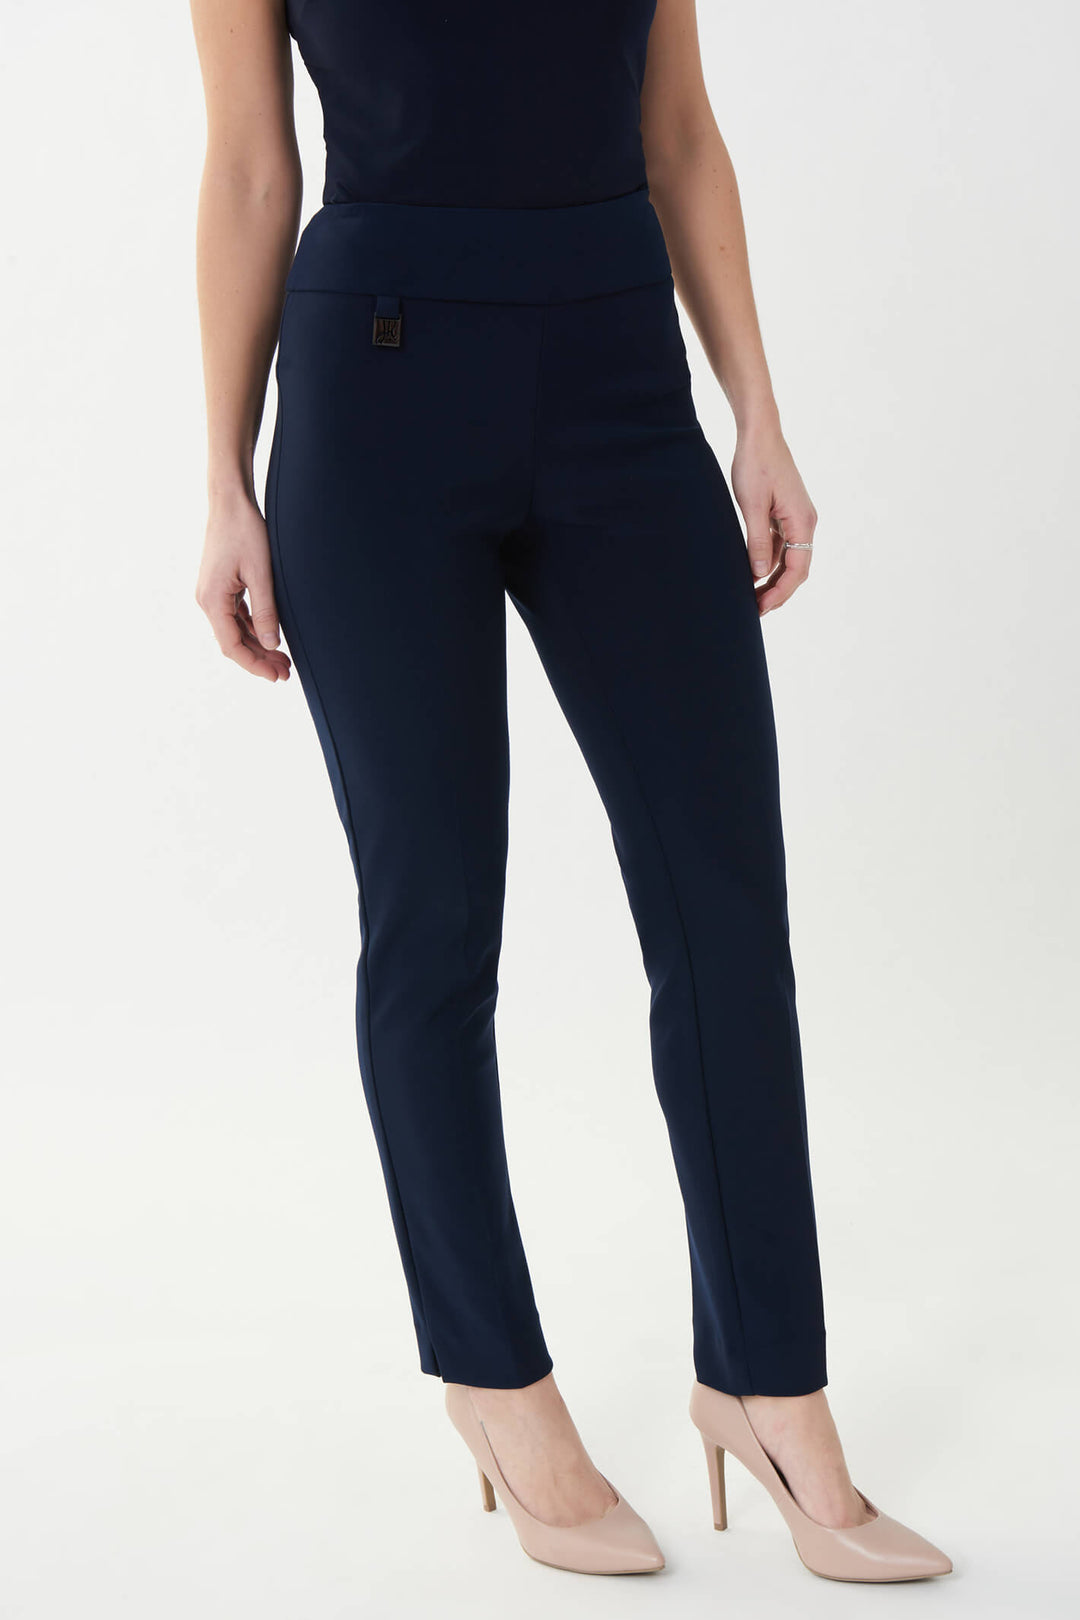 Joseph Ribkoff 144092RR 2166 Midnight Blue Pull-On Trousers - Experience Boutique